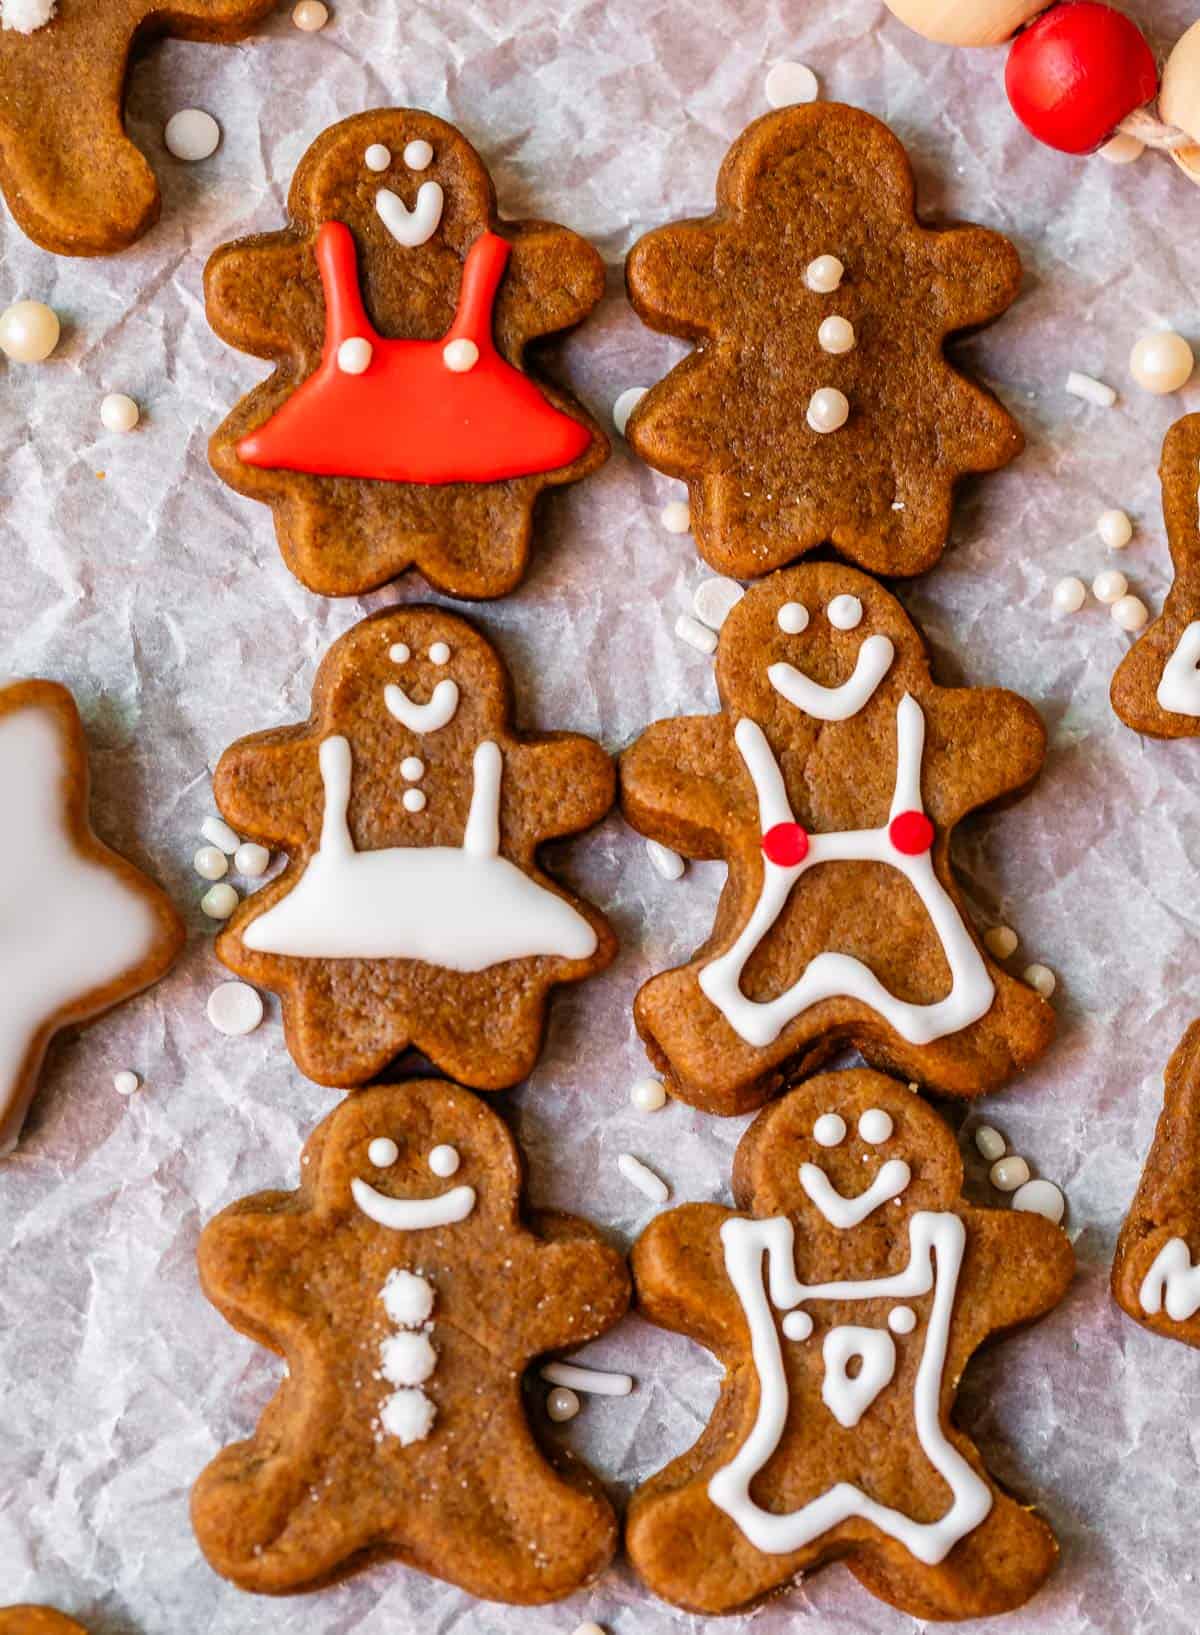 6 gingerbread people with white and red icing lined up on parchment paper.